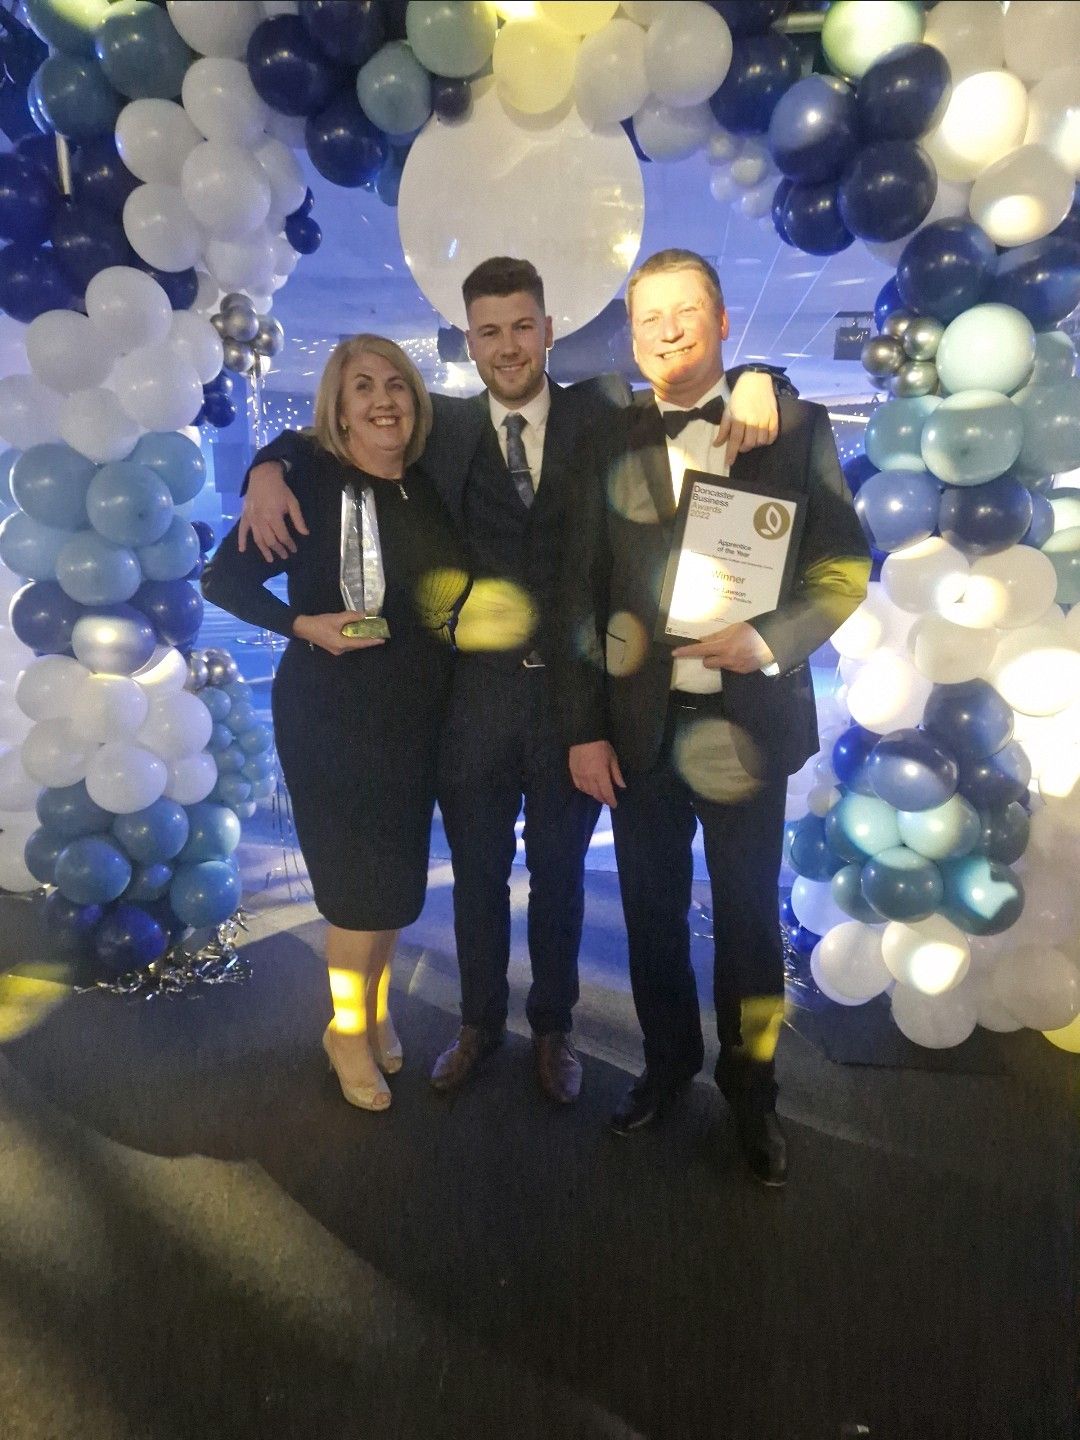 Automation Engineer Apprentice Luke Lawson is pictured holding his Apprentice of the Year Award at the 2022 Doncaster Business Awards. Stood to his left is his Mum Joanne, and to his left his Dad Alan. They are beneath a blue and white balloon arch.